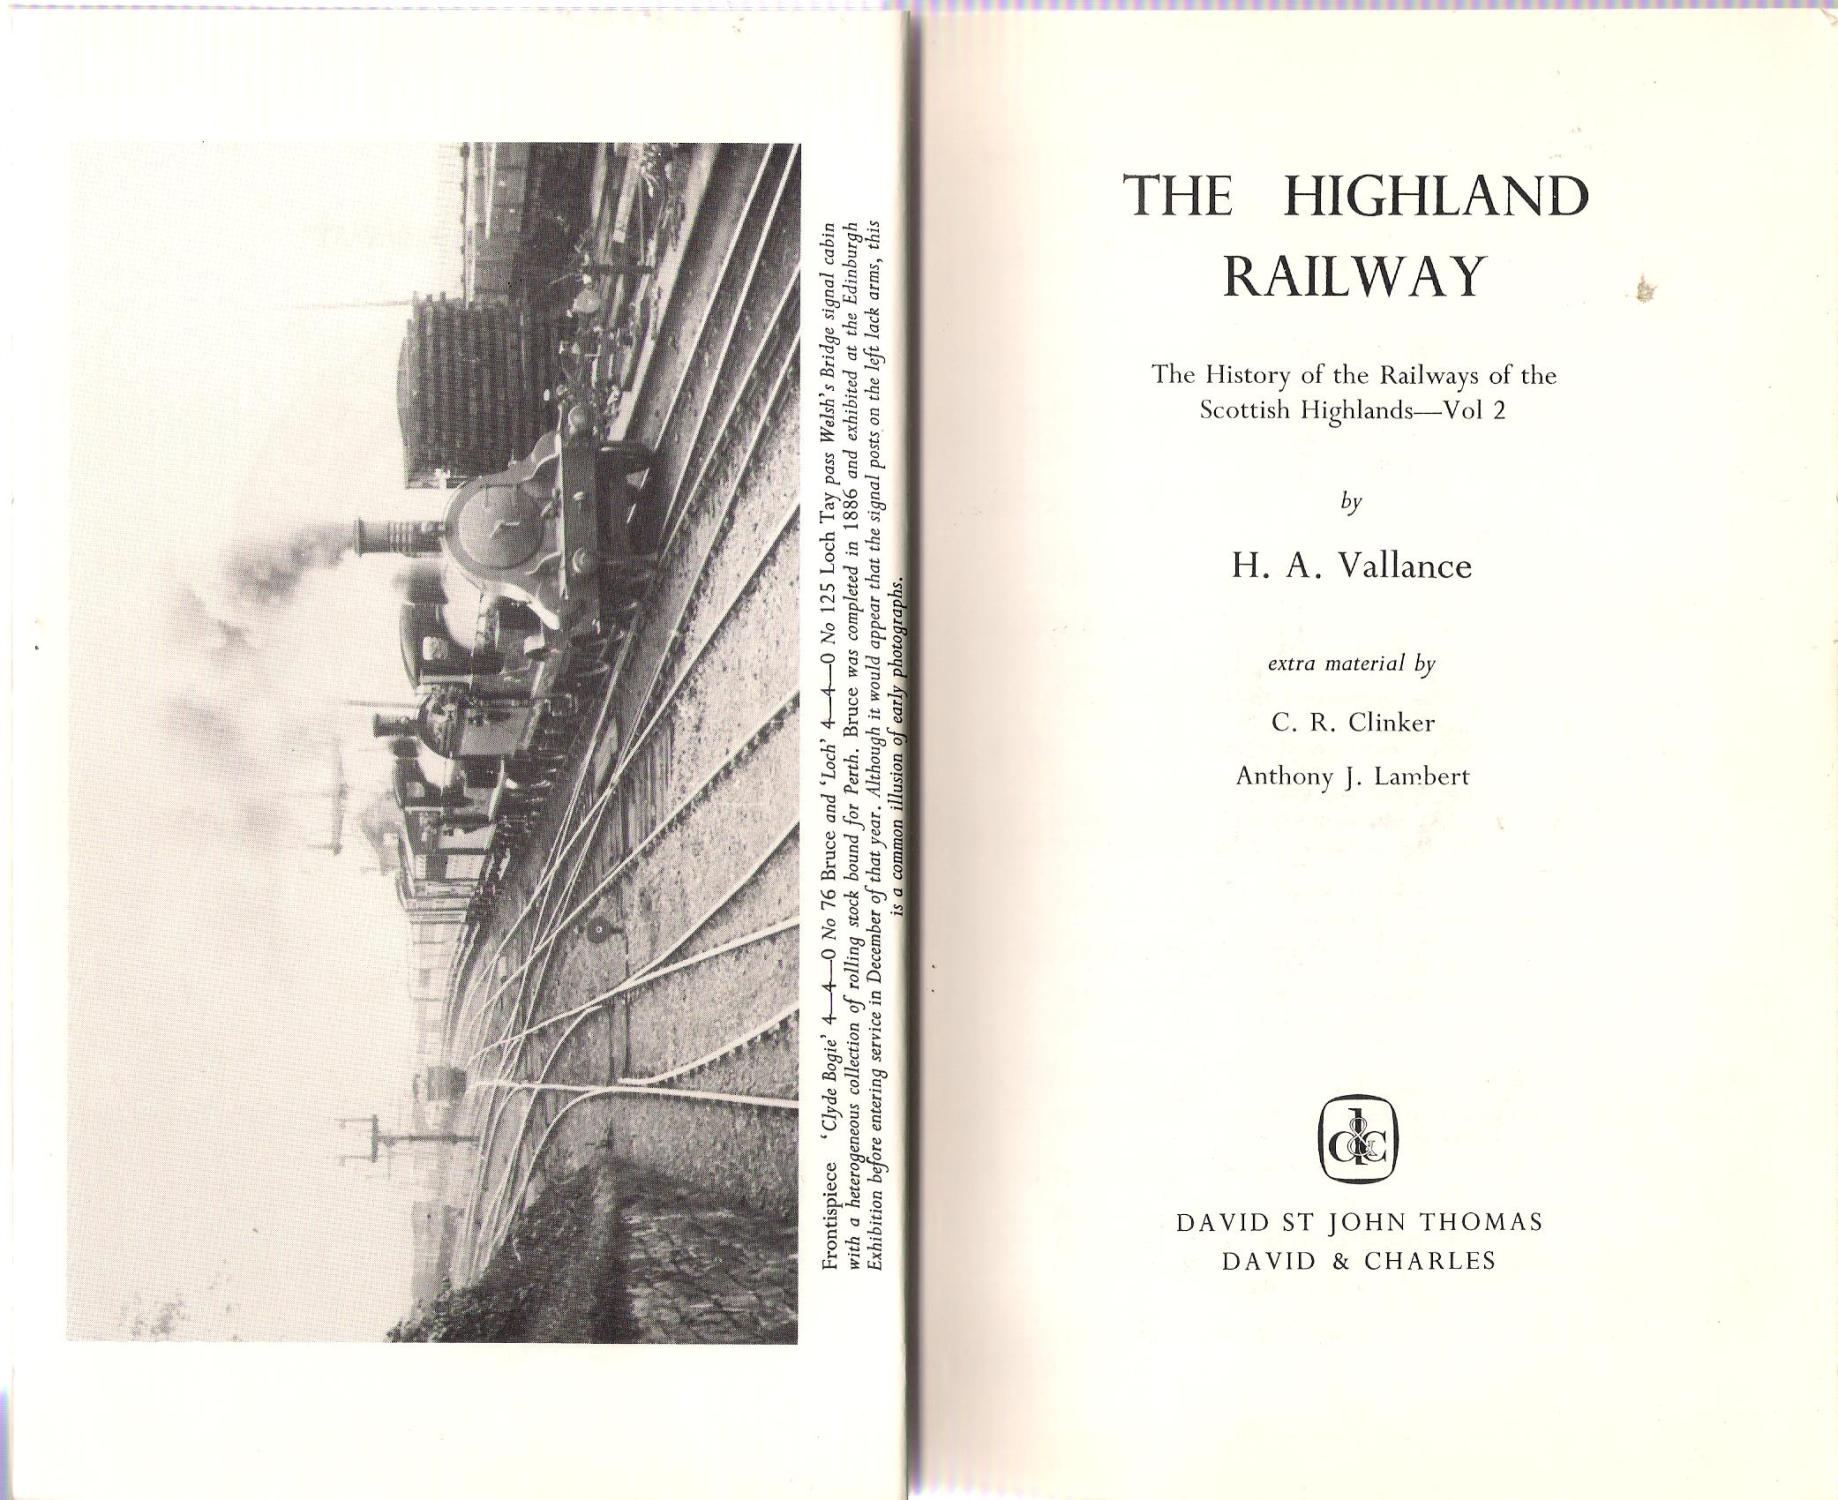 The Highland Railway : The History of the Railways of the Scottish Highlands - Vol 2 - Vallance, H.A.;Clinker, C.R.